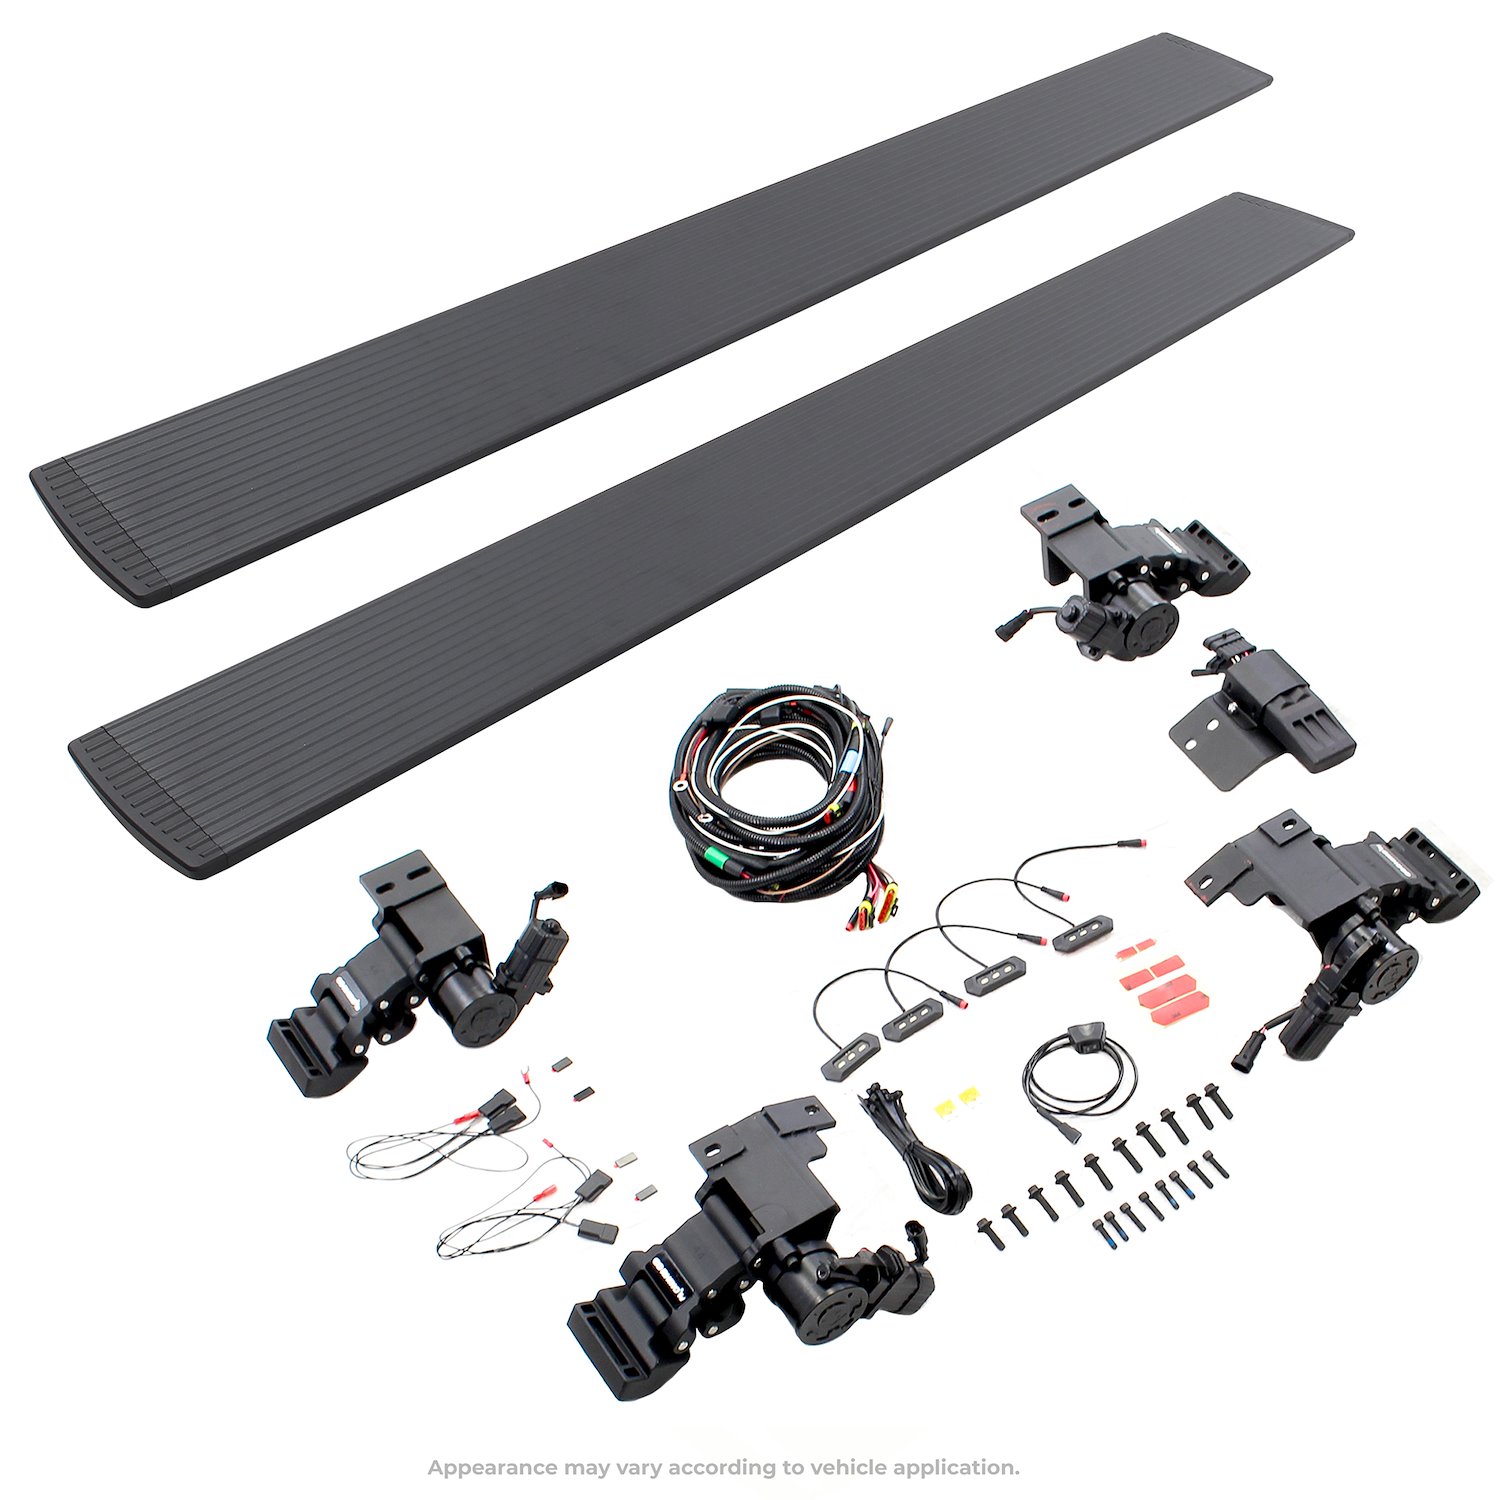 E1 Electric Running Board Kit Fits Select GMC Sierra 3500 HD Double Cab Pickup - Diesel Only